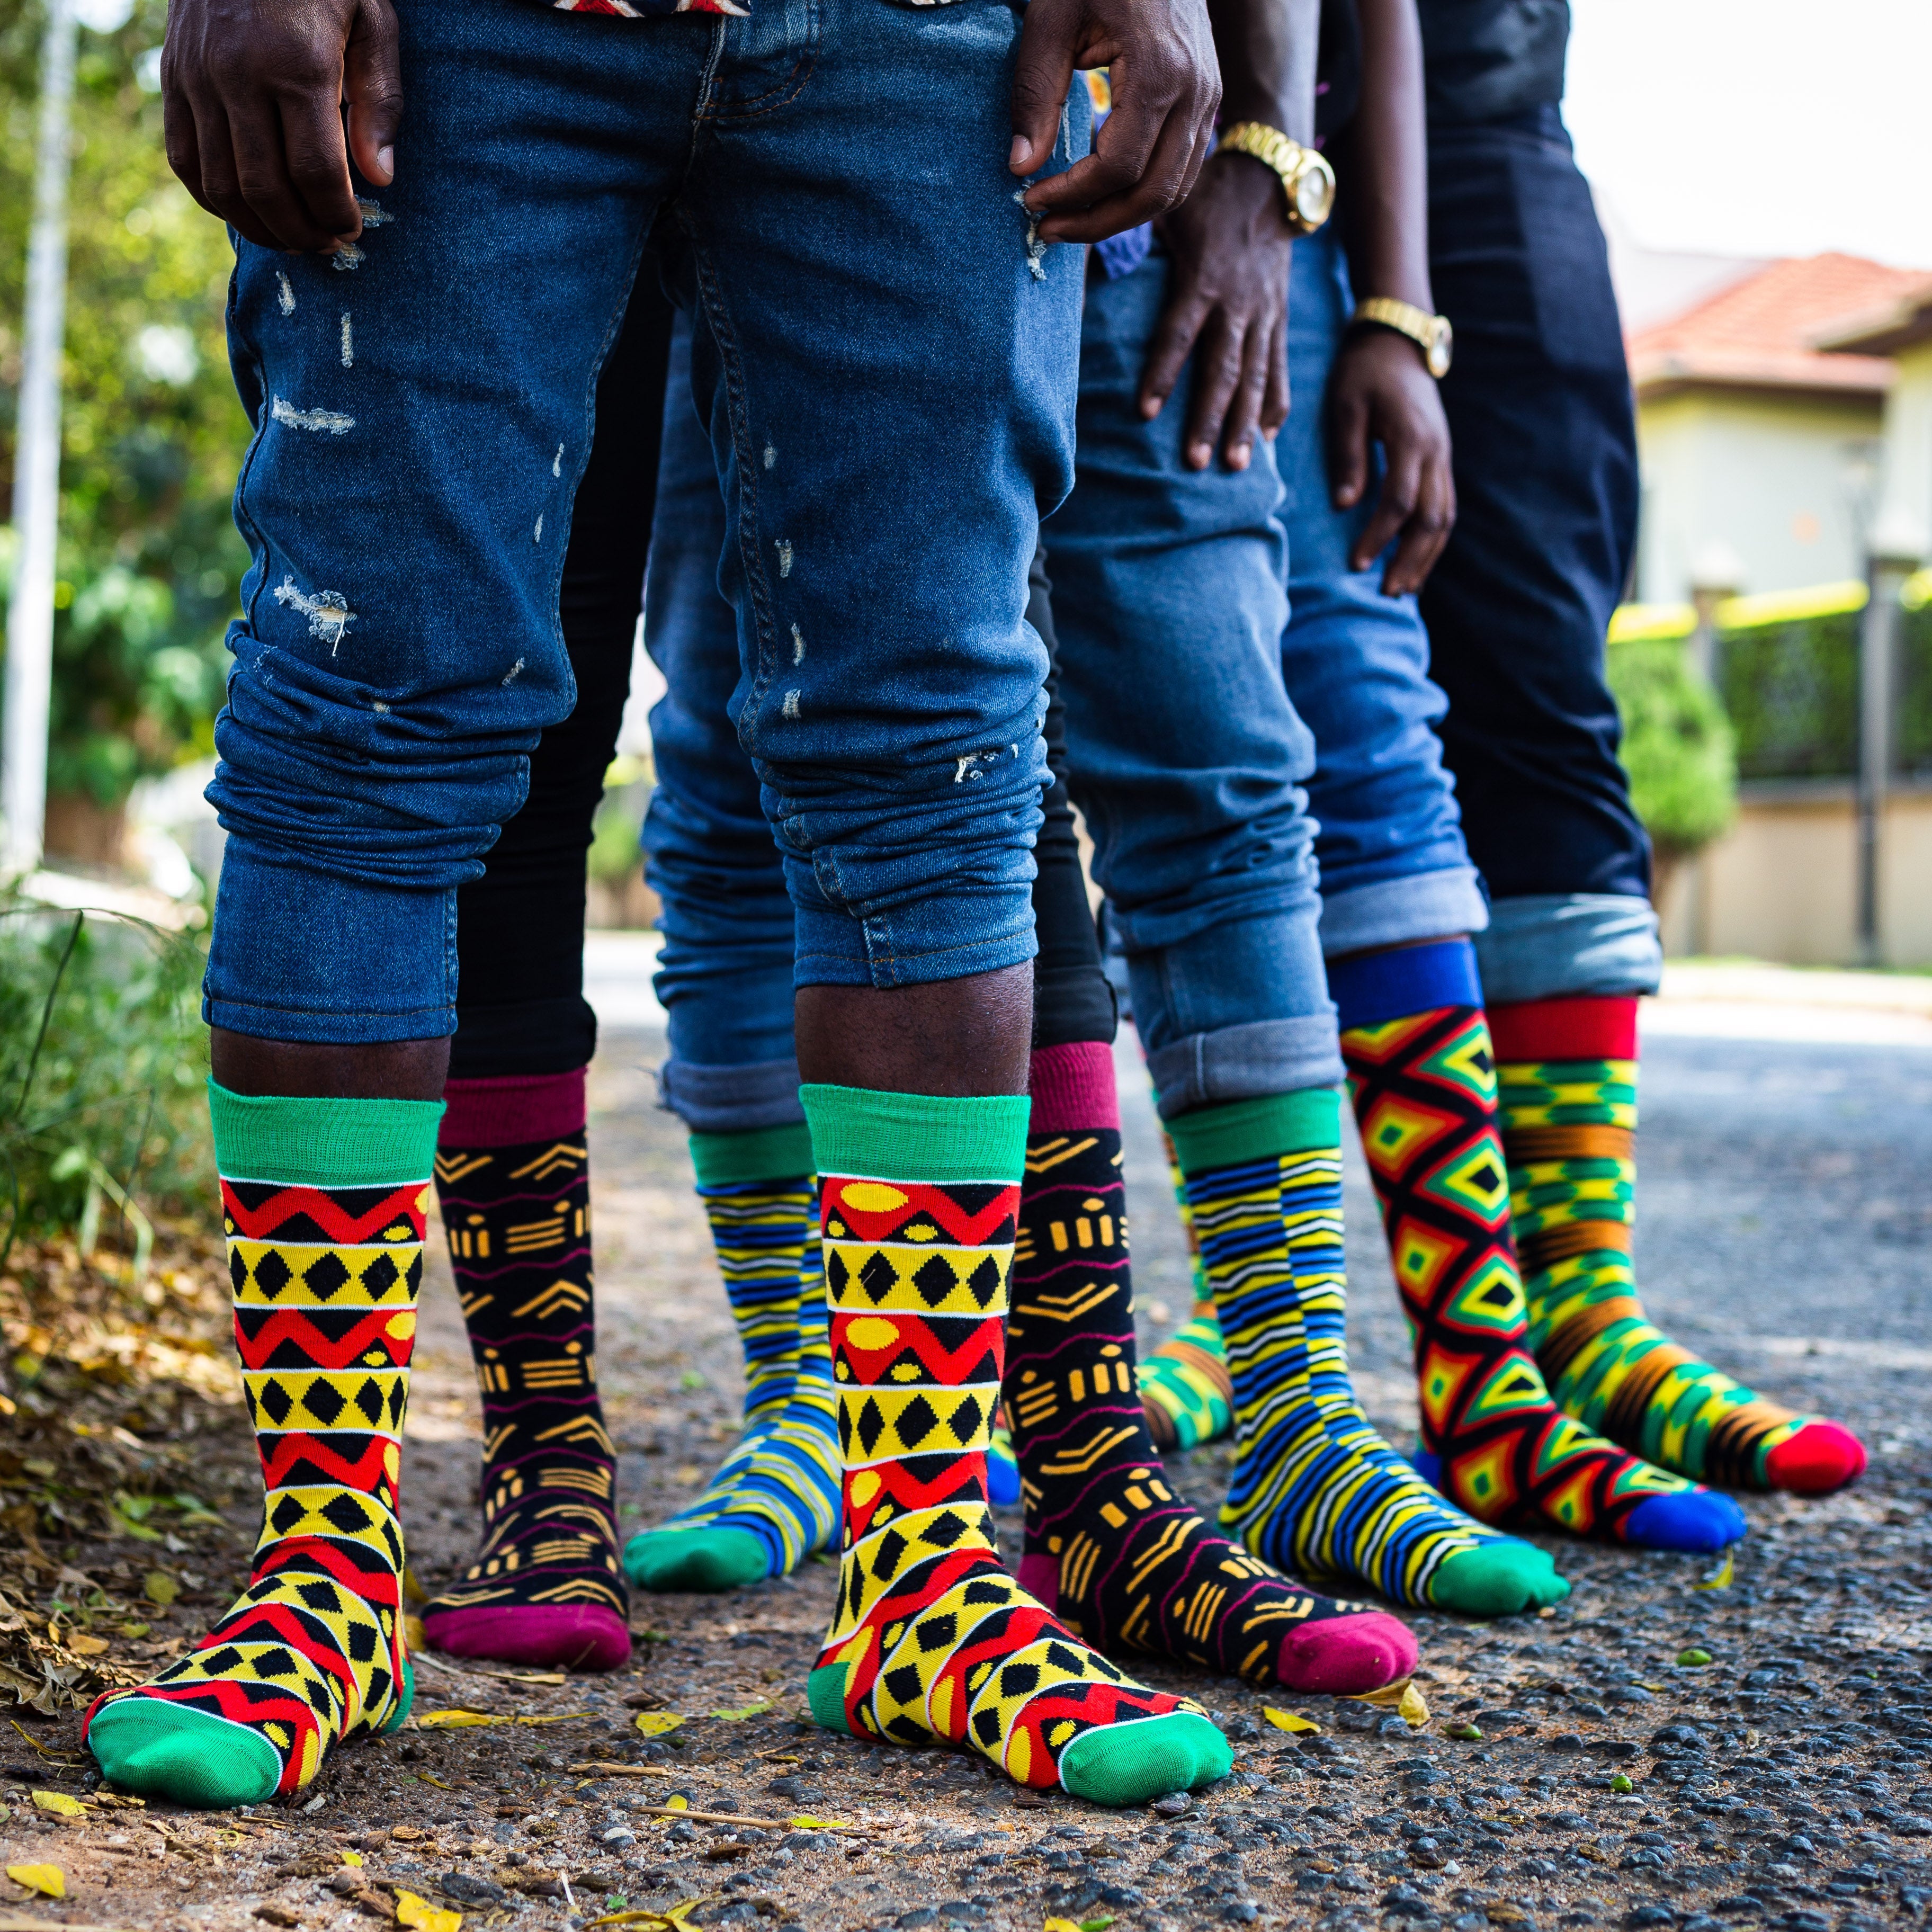 The New Afrisocks | AfriSocks Collection